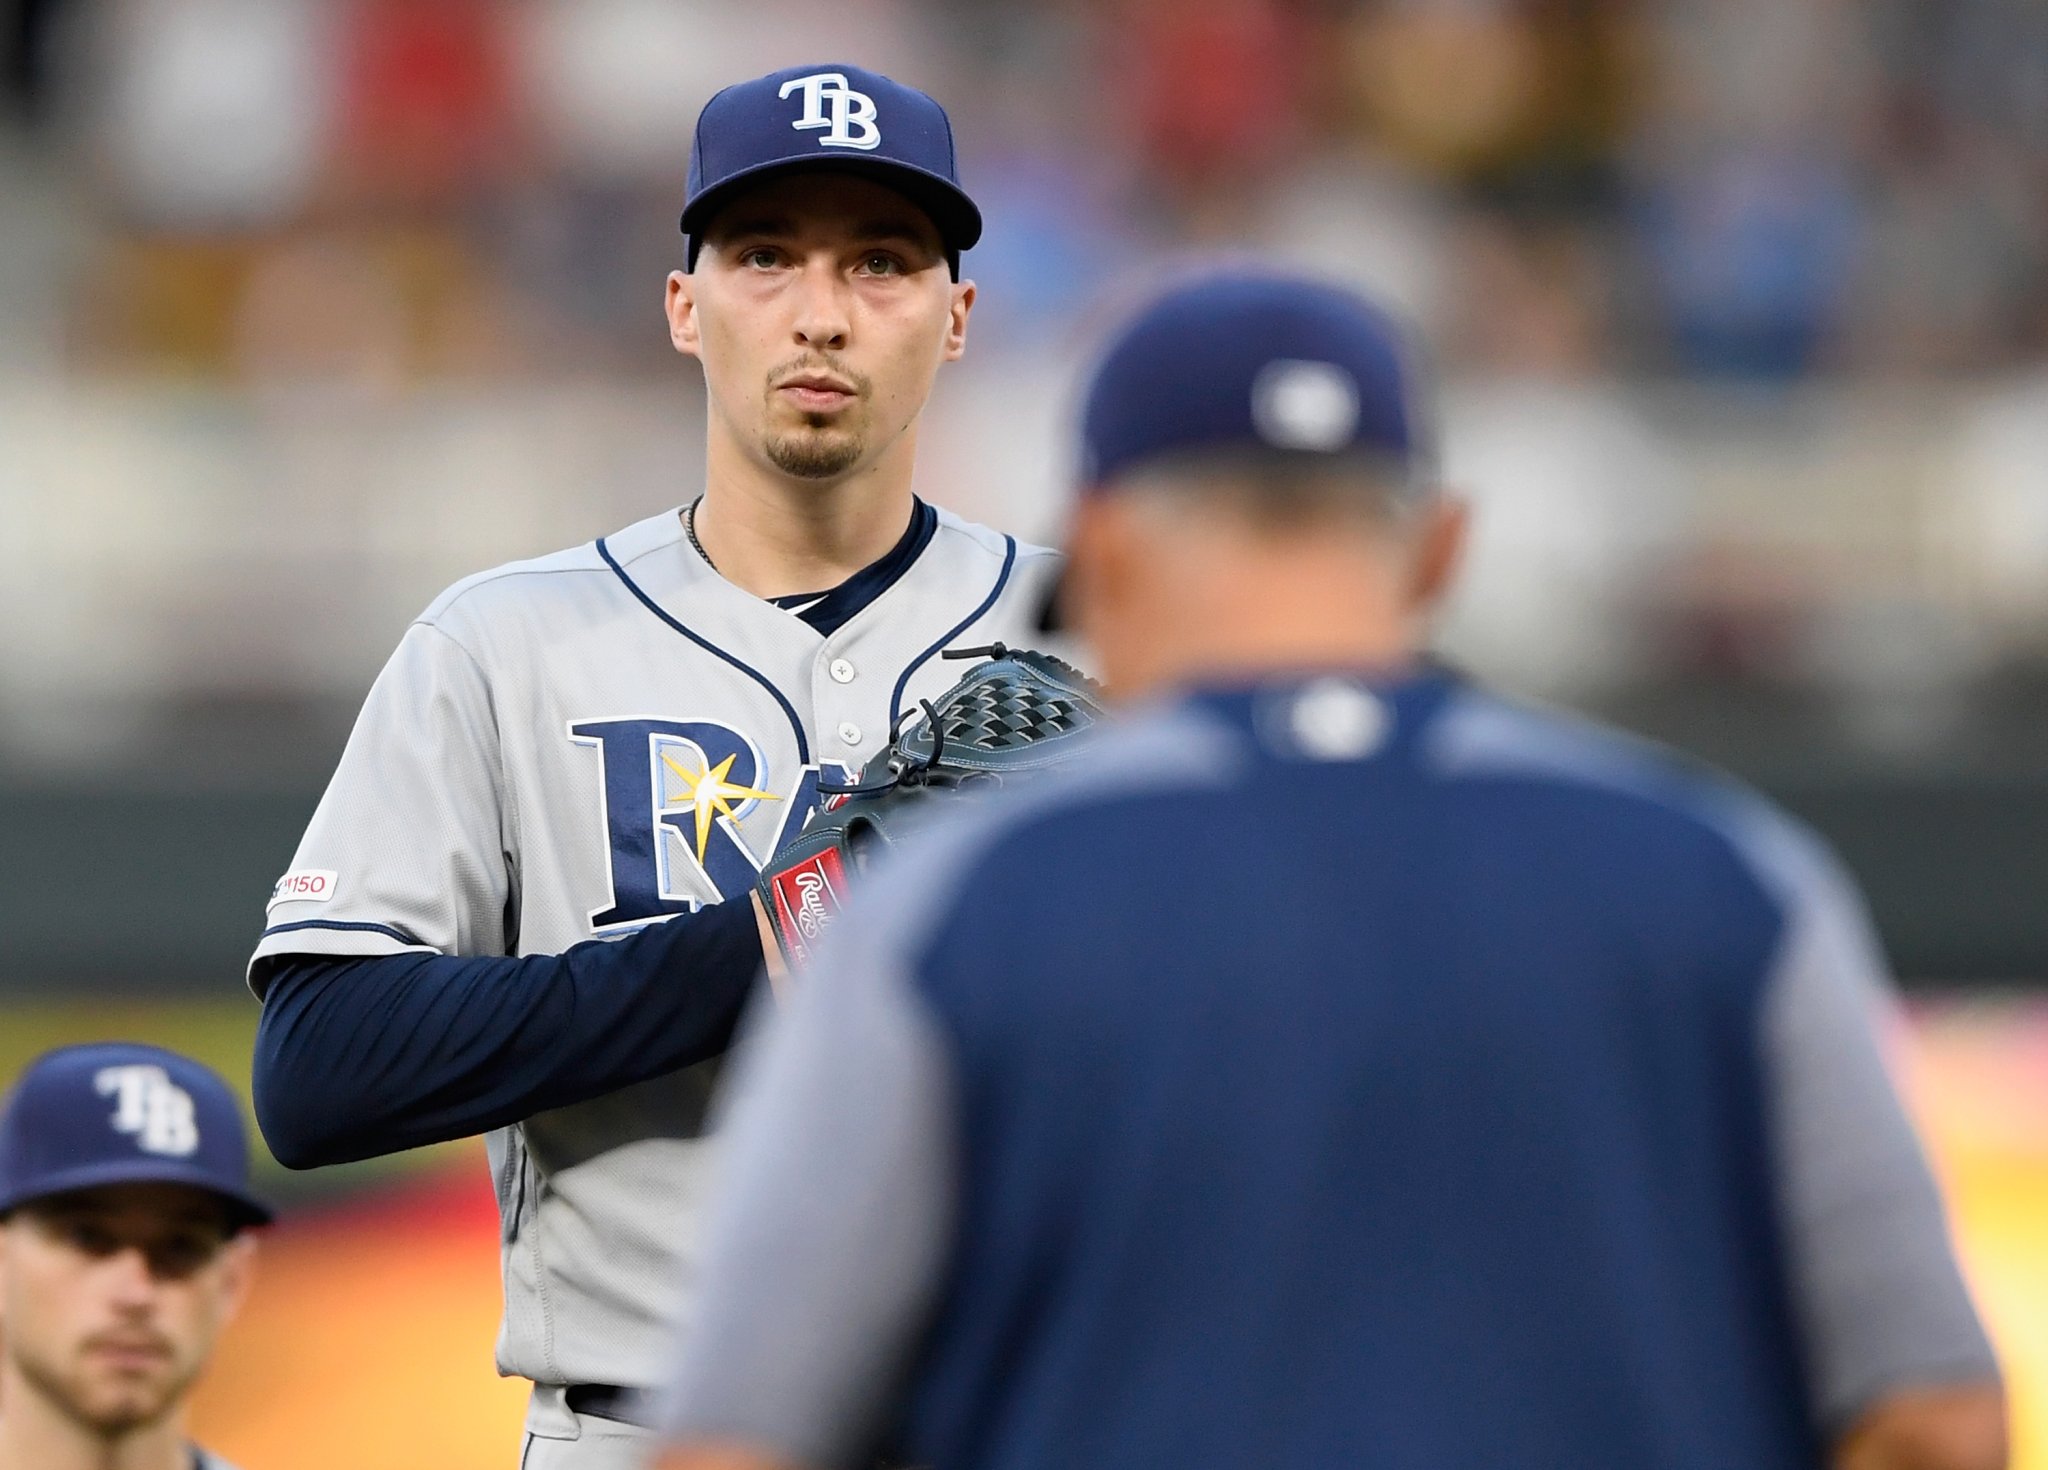 Baseball Fans Blast Rays' Kevin Cash After He Makes One Of The Worst Managerial Decisions In World Series History By Pulling Blake Snell Early